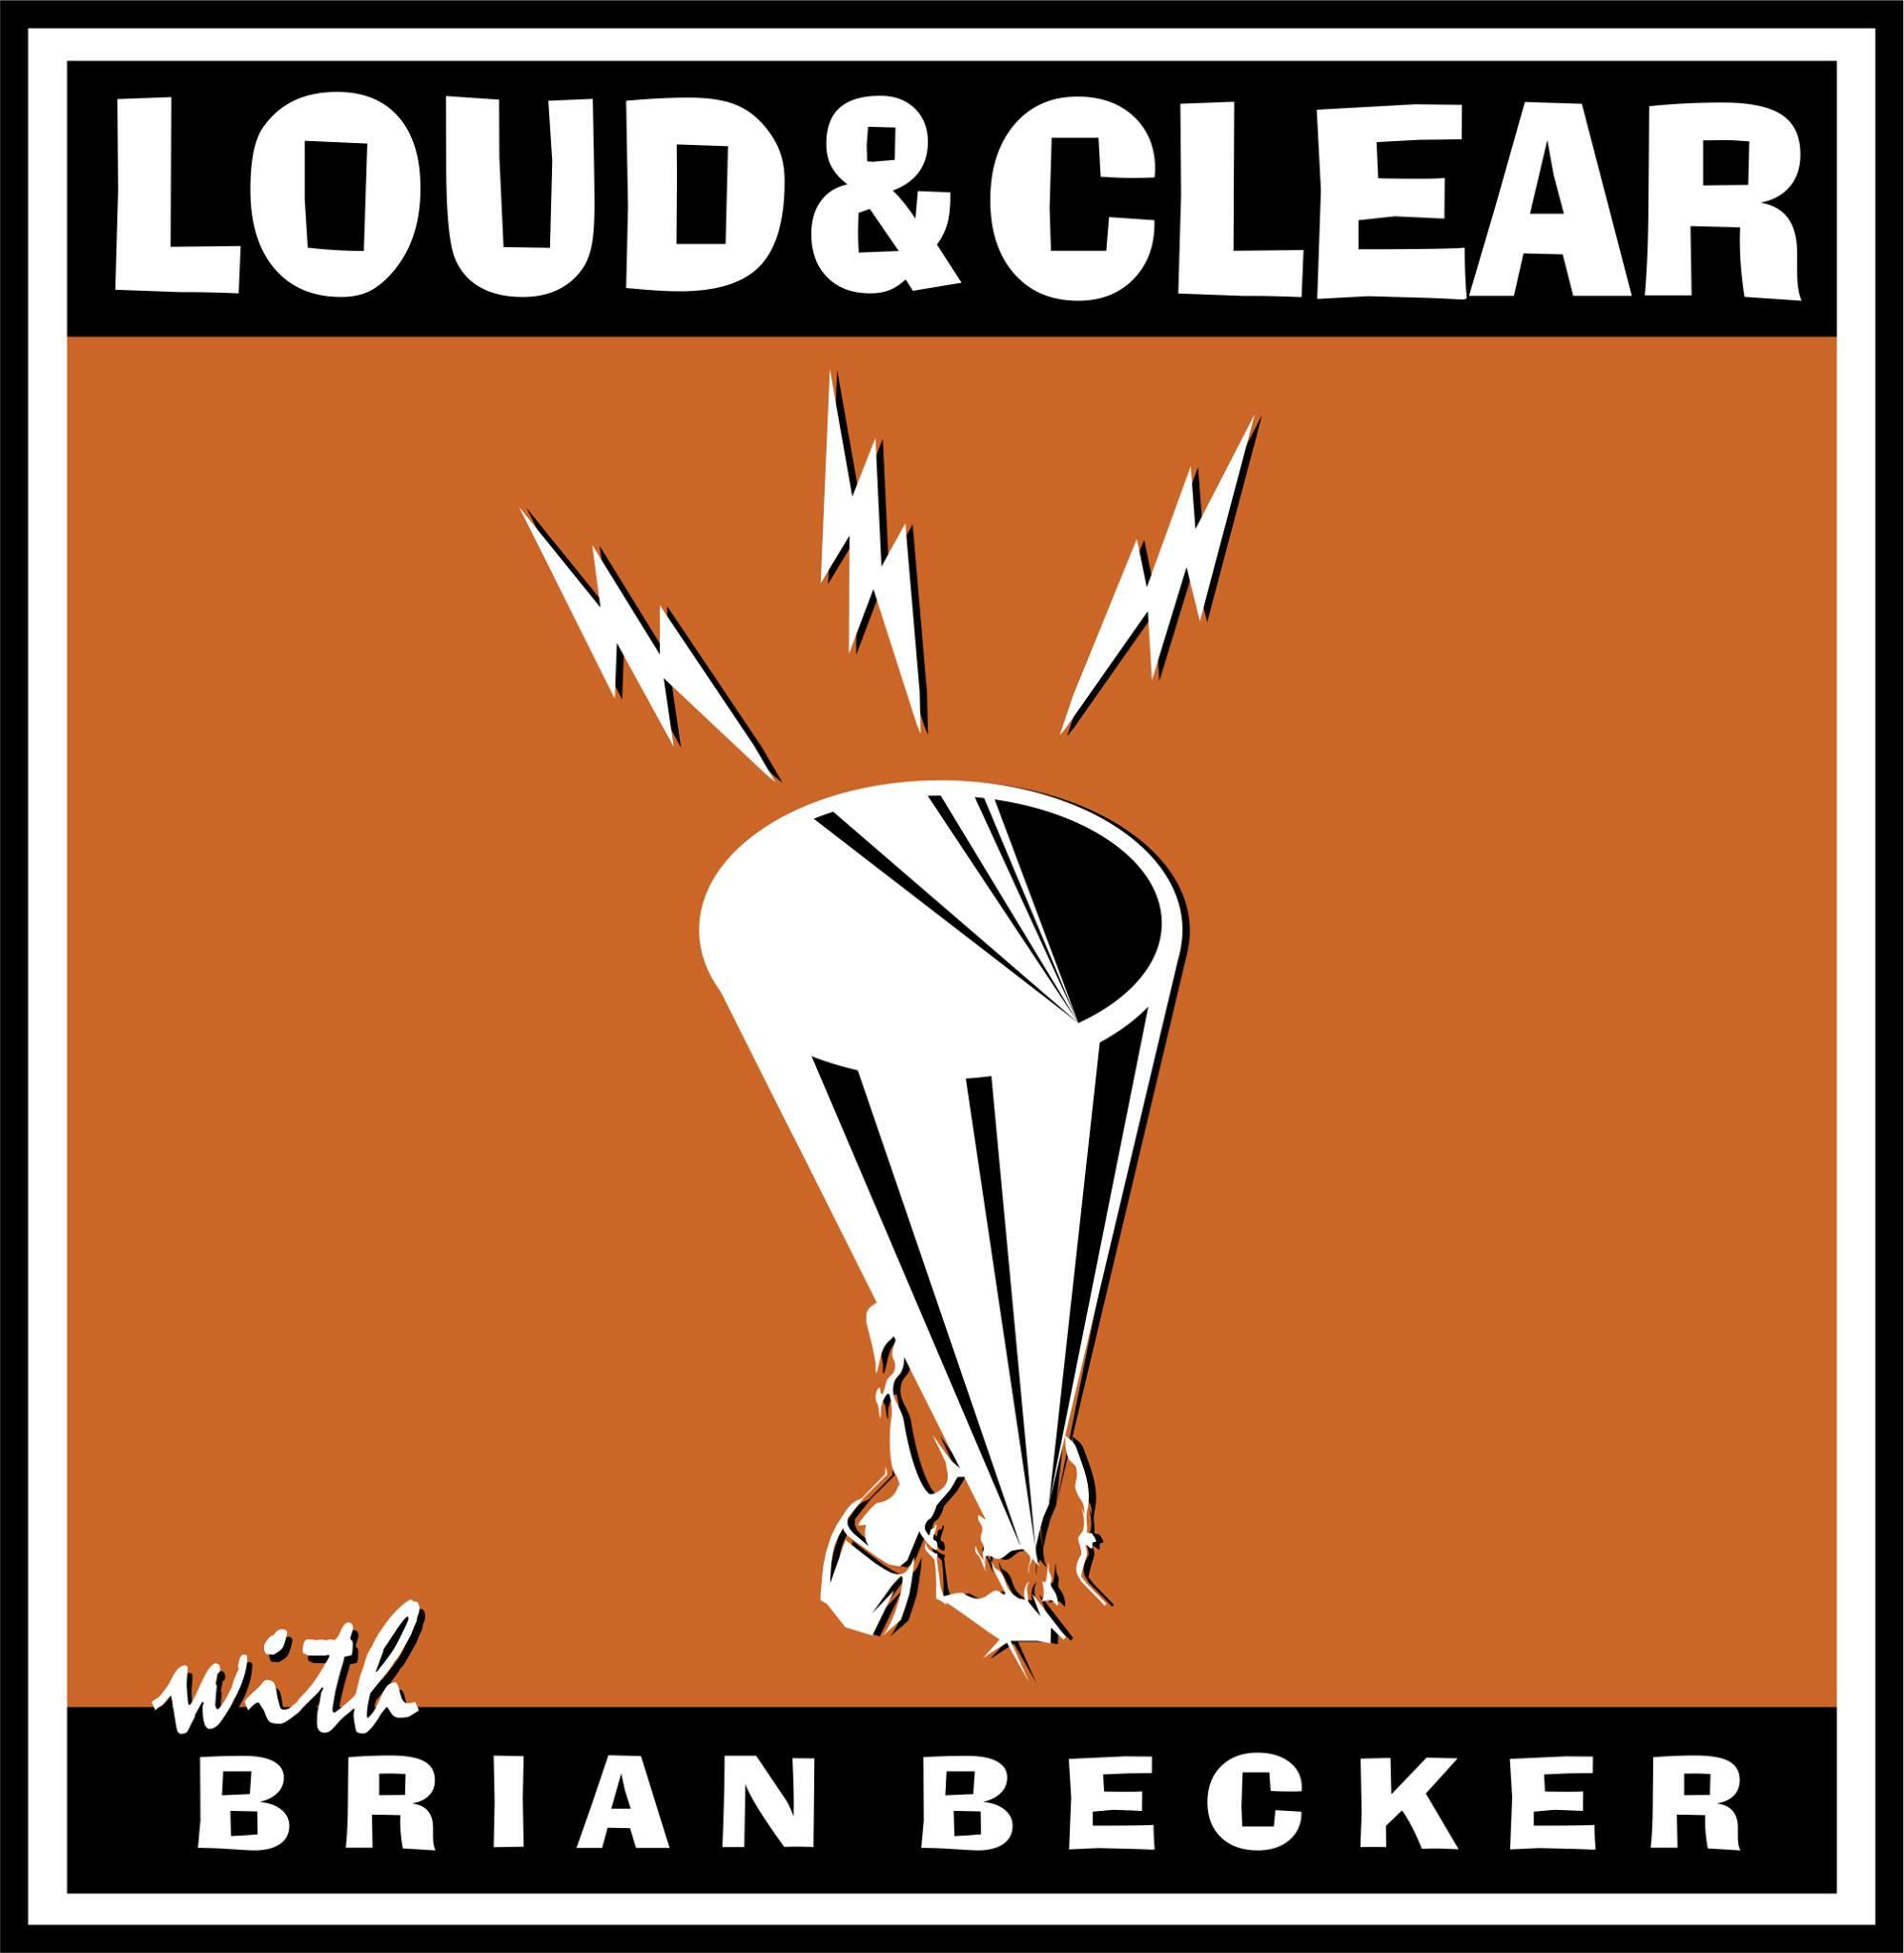 Loud and clear. 5:5 Loud and Clear. Loud and Clear idiom. Autograph Loud and Clear.